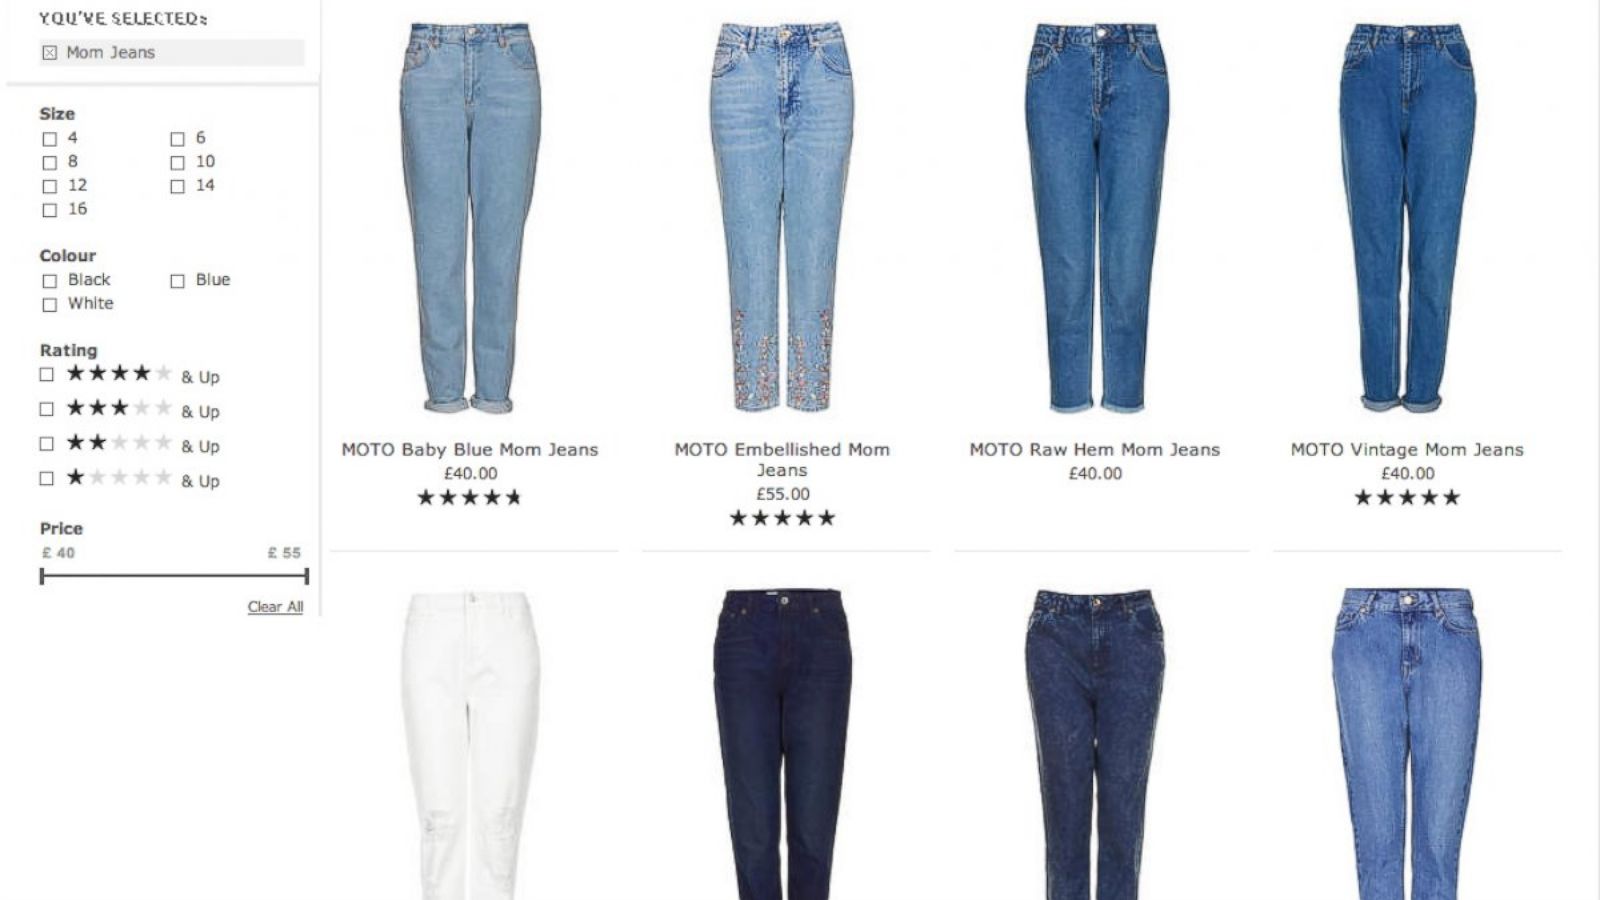 Latest Wave of Jeans Not for at - ABC News